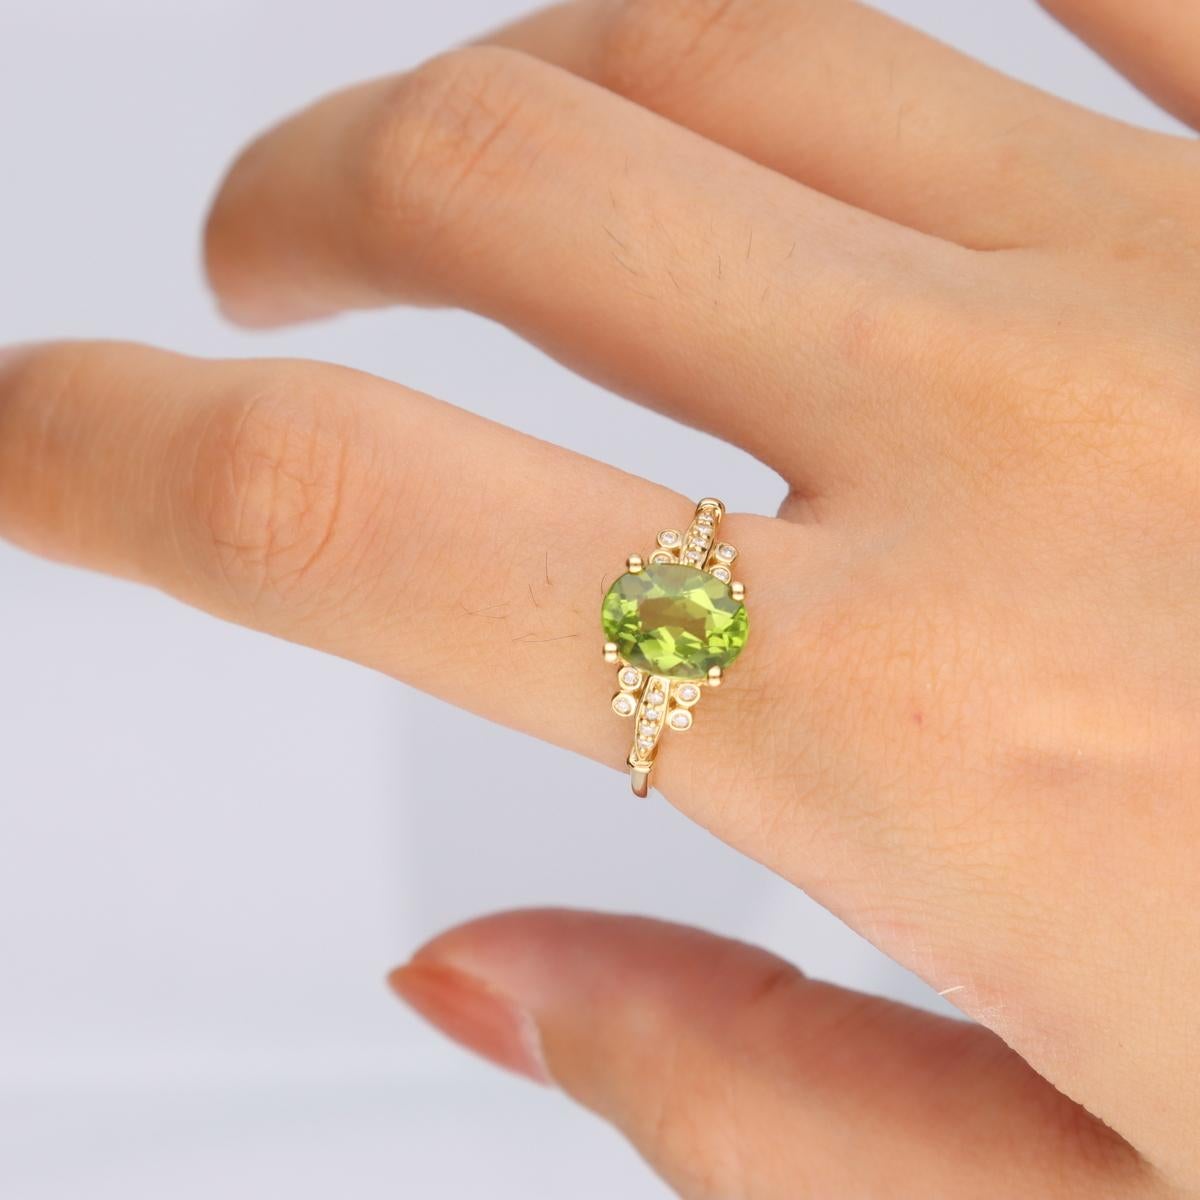 Stunning, timeless and classy eternity Unique ring. Decorate yourself in luxury with this Gin & Grace ring. This ring is made up of 7X9 Oval-Cut Prong Setting Genuine Peridot (1 pcs) 2.0 Carat and Round-Cut Prong Setting Natural Diamond (16 pcs)